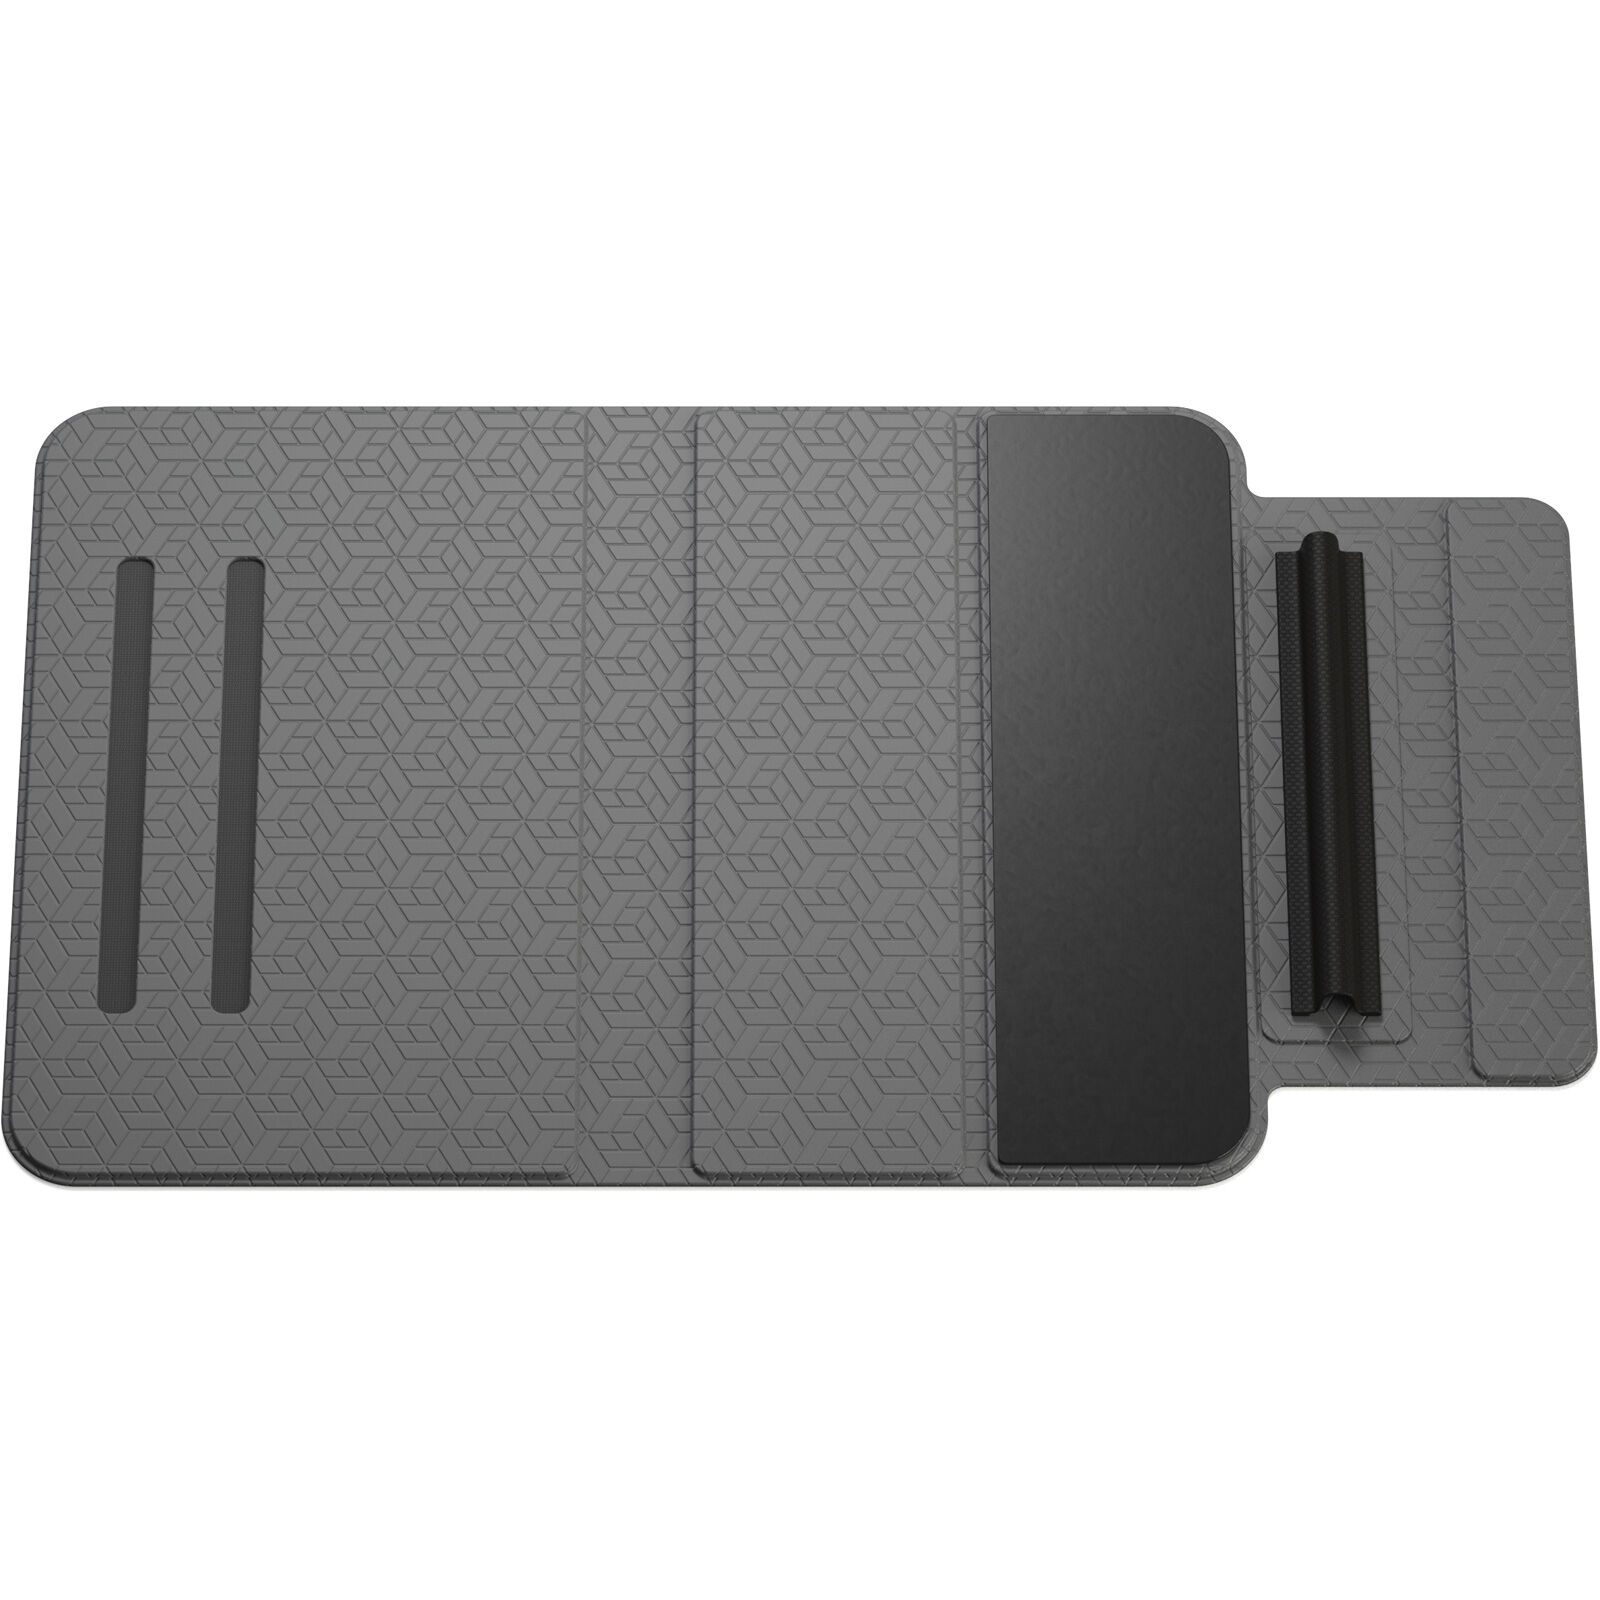 microsoft surface duo cases